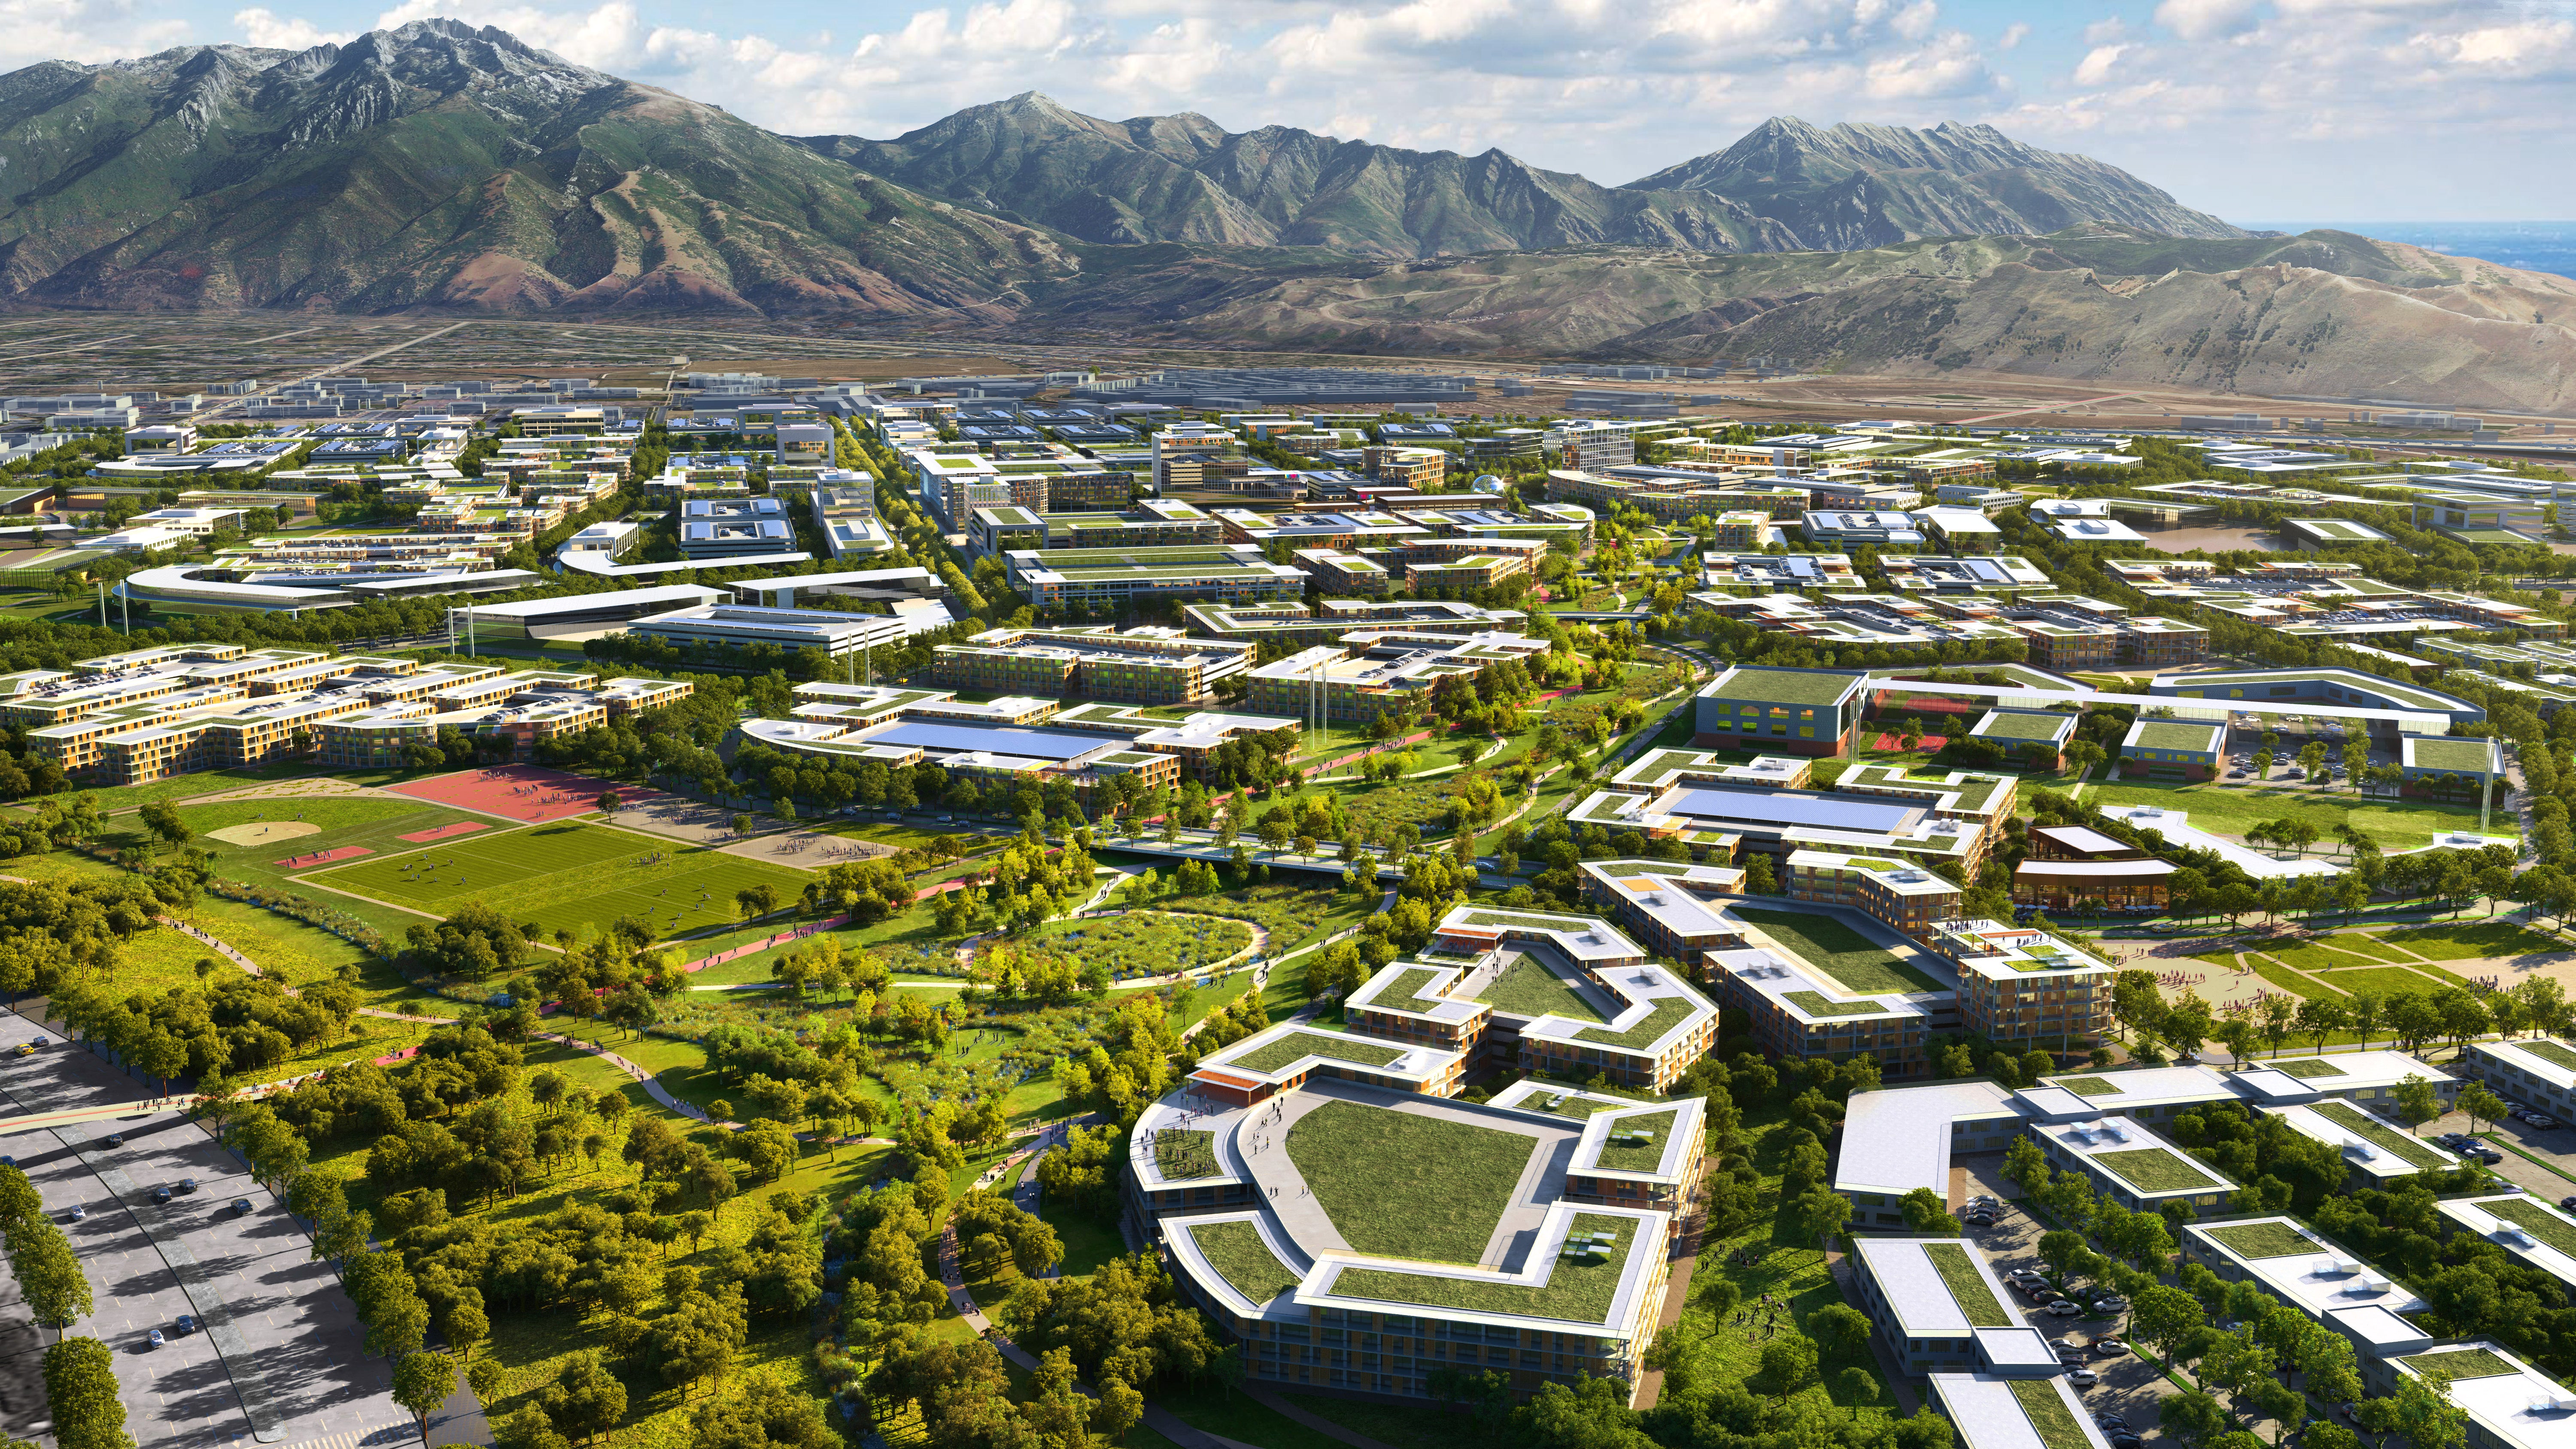 A rendering of the finished community against Utah’s mountainous landscape